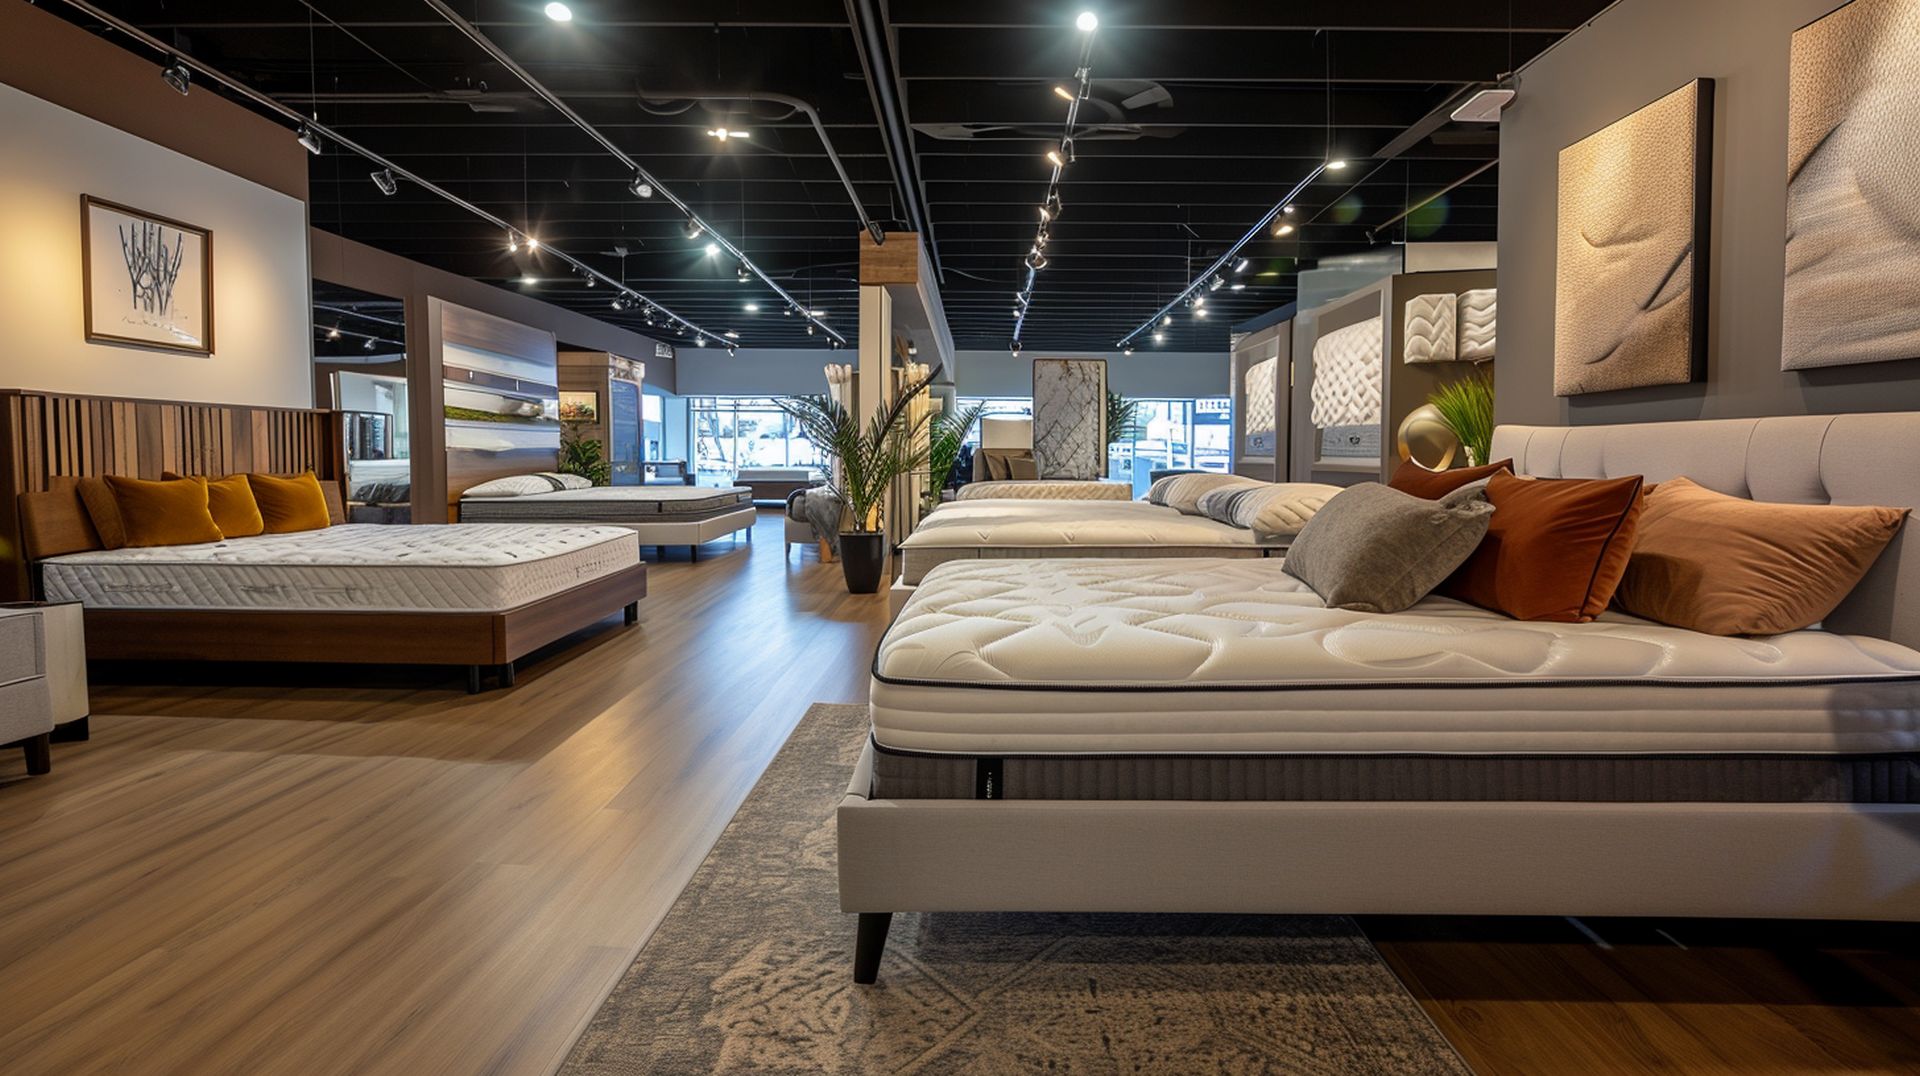 If you're looking for a new bed, mattress stores in Stockton offer the best customer and delivery service, financing, and warranties in California